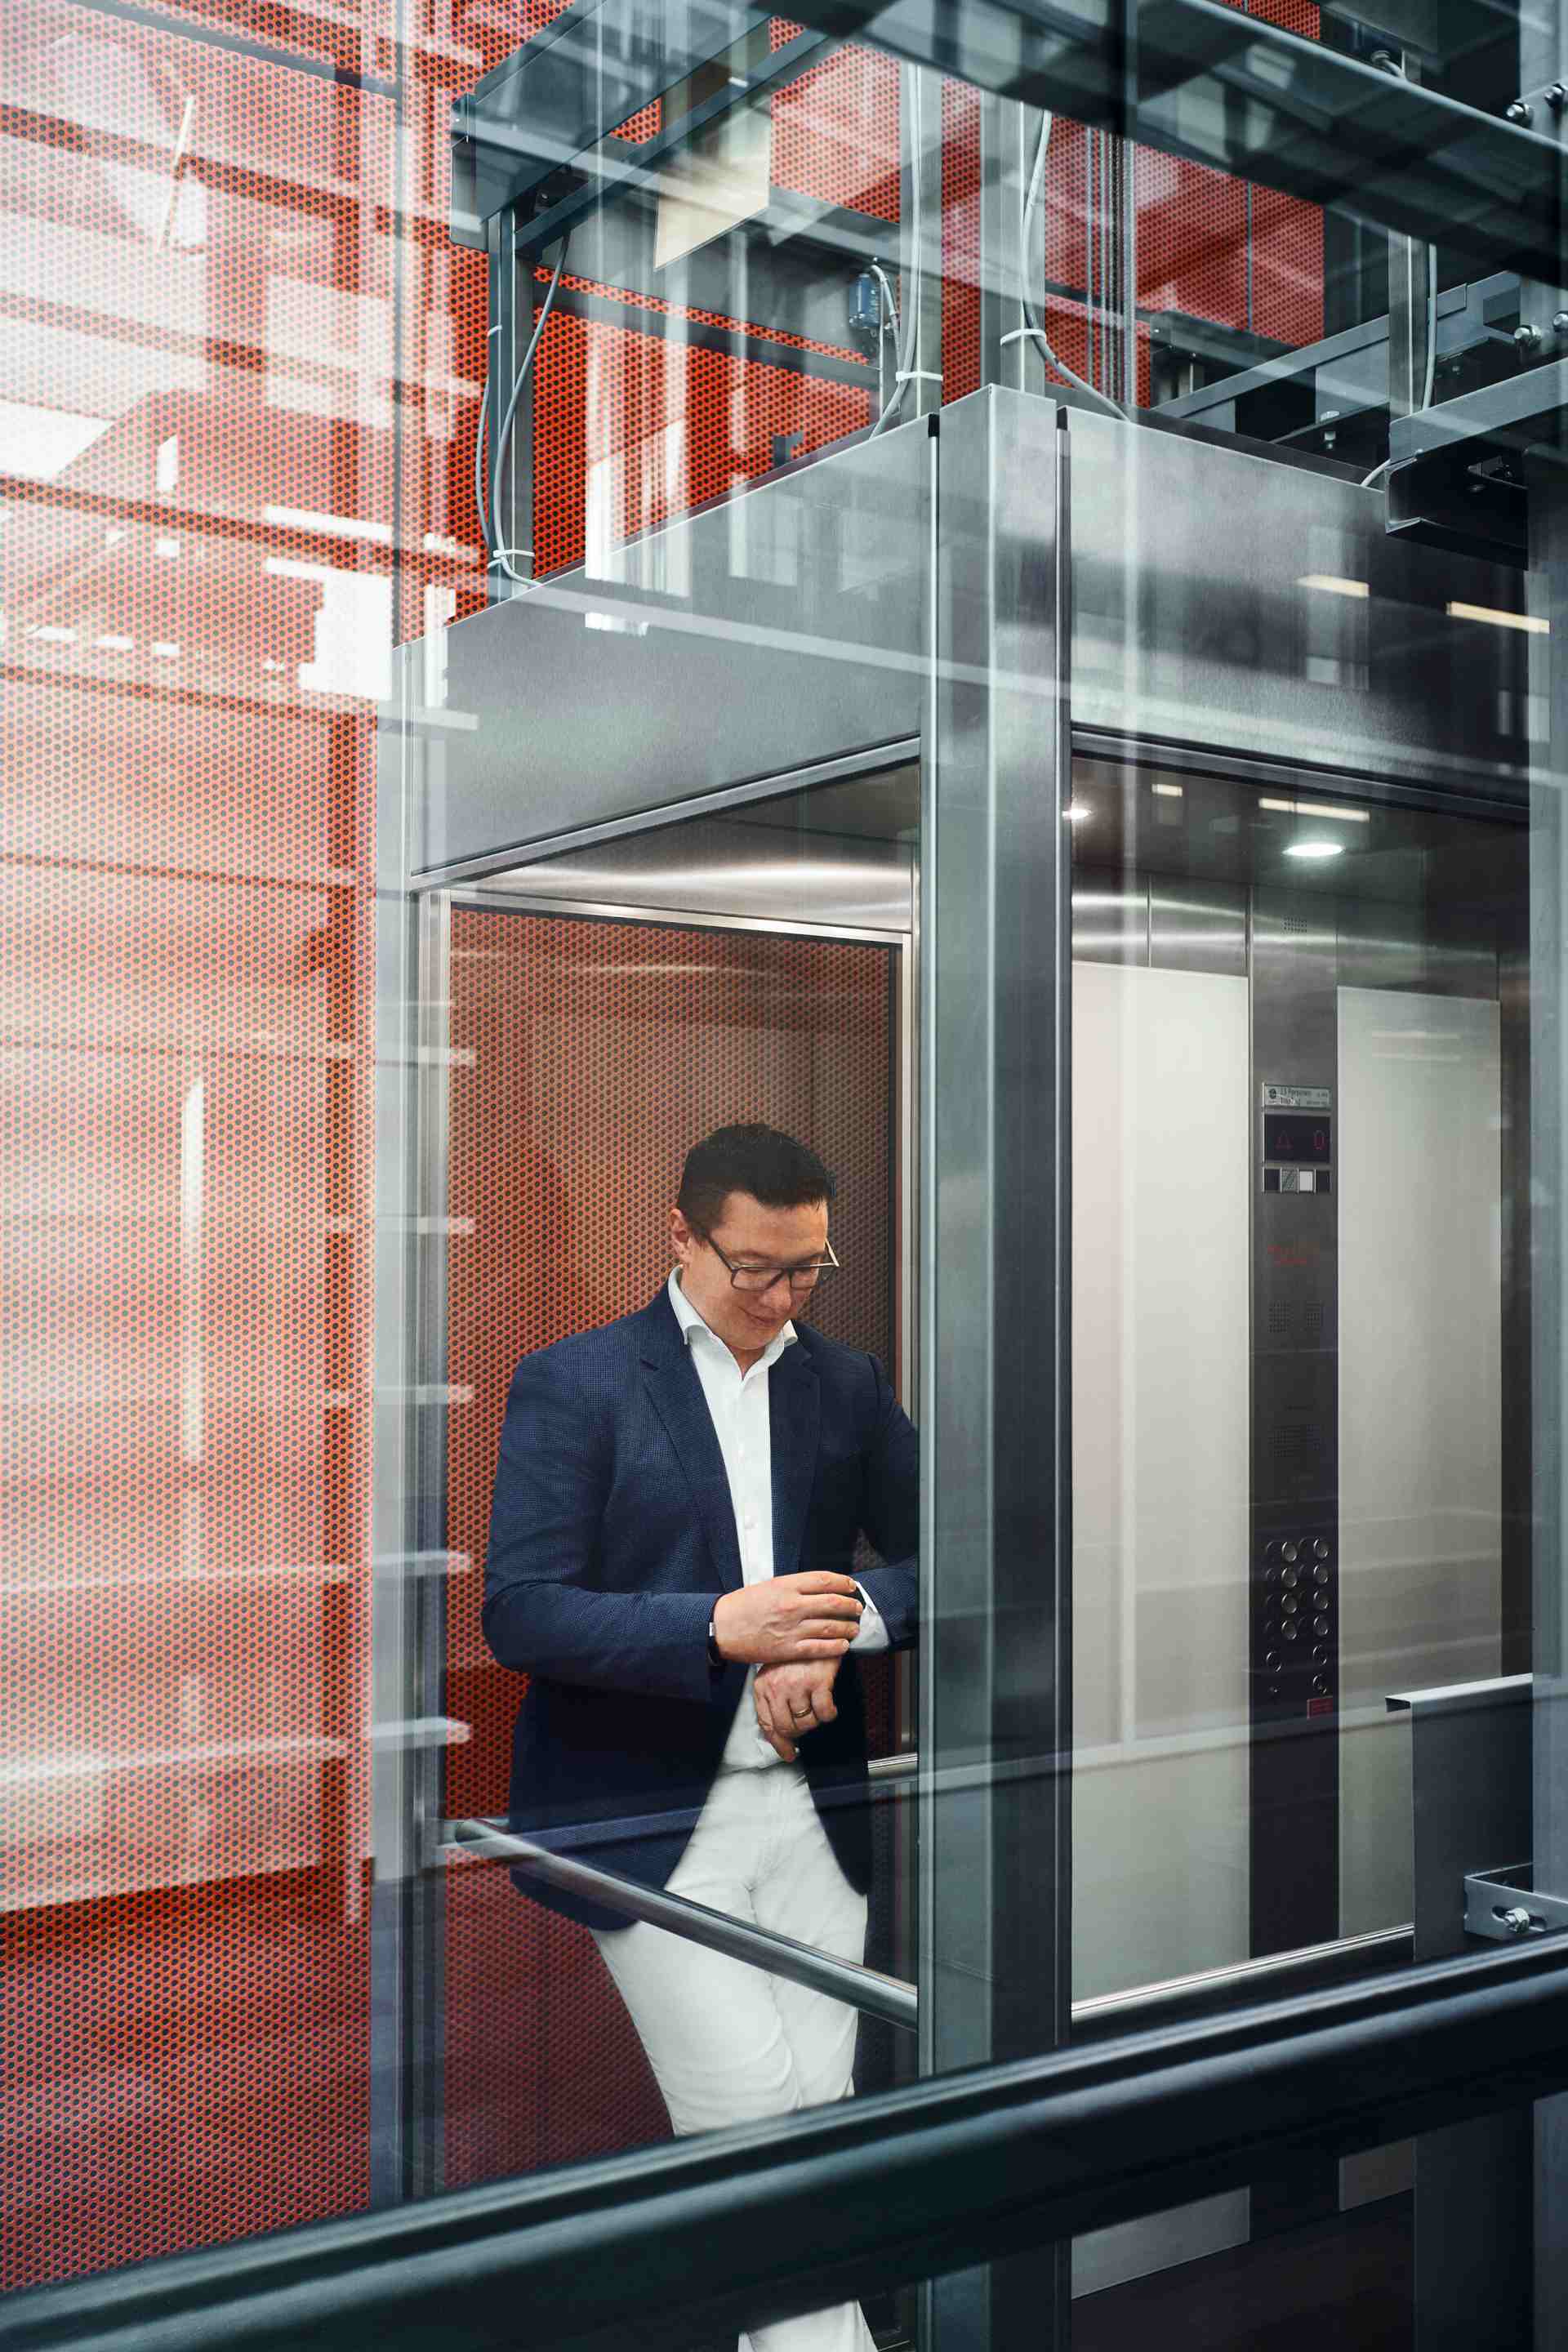 Giorgio Delucchi standing in a glass elevator, looking at his wristwatch.